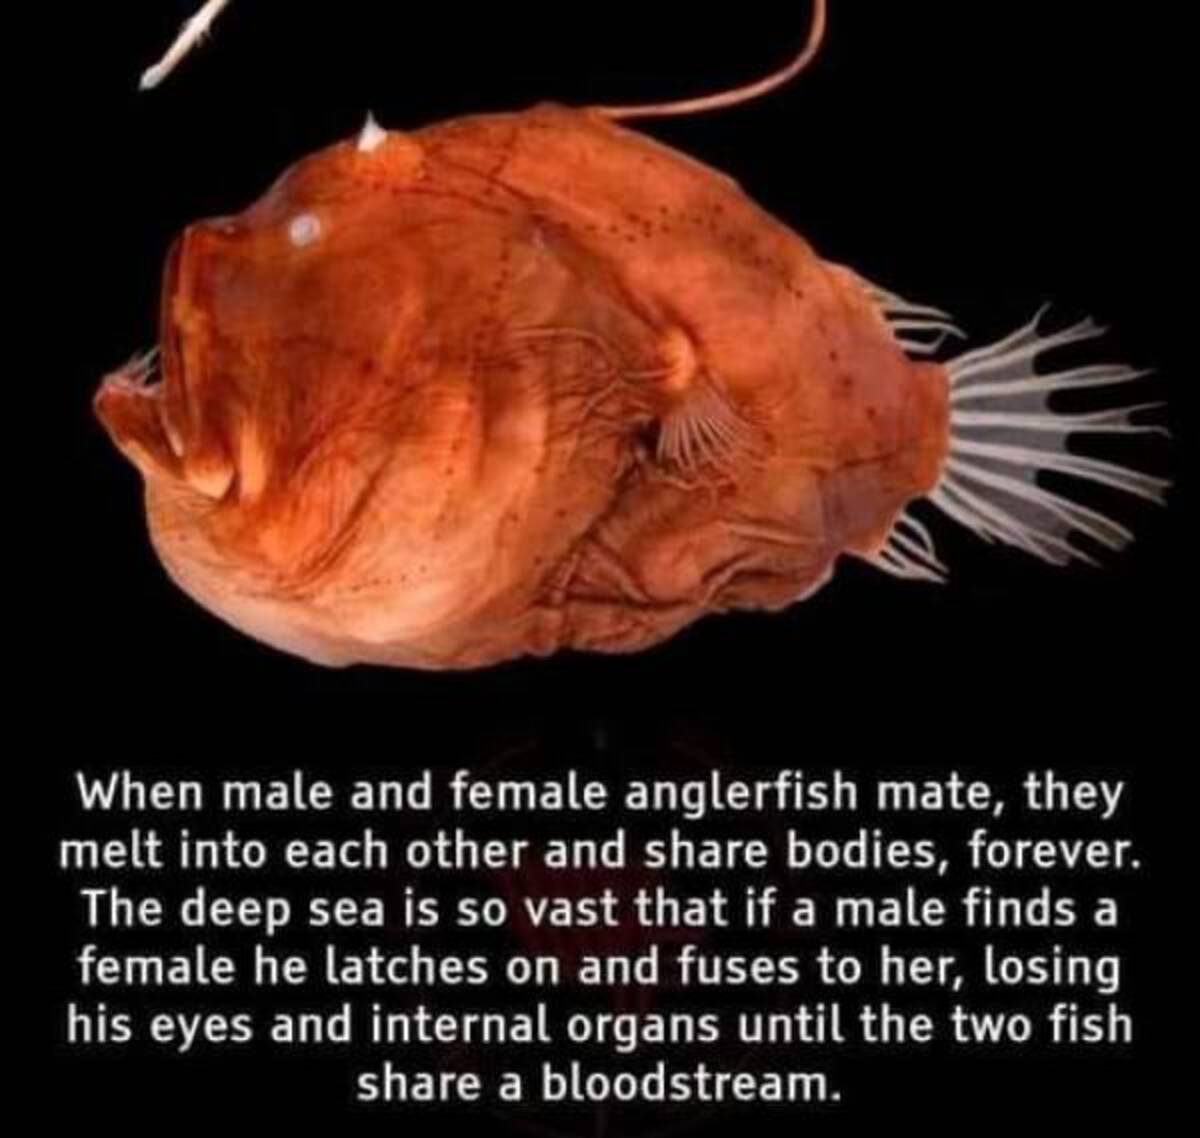 anglerfish reproduction - When male and female anglerfish mate, they melt into each other and bodies, forever. The deep sea is so vast that if a male finds a female he latches on and fuses to her, losing his eyes and internal organs until the two fish a b